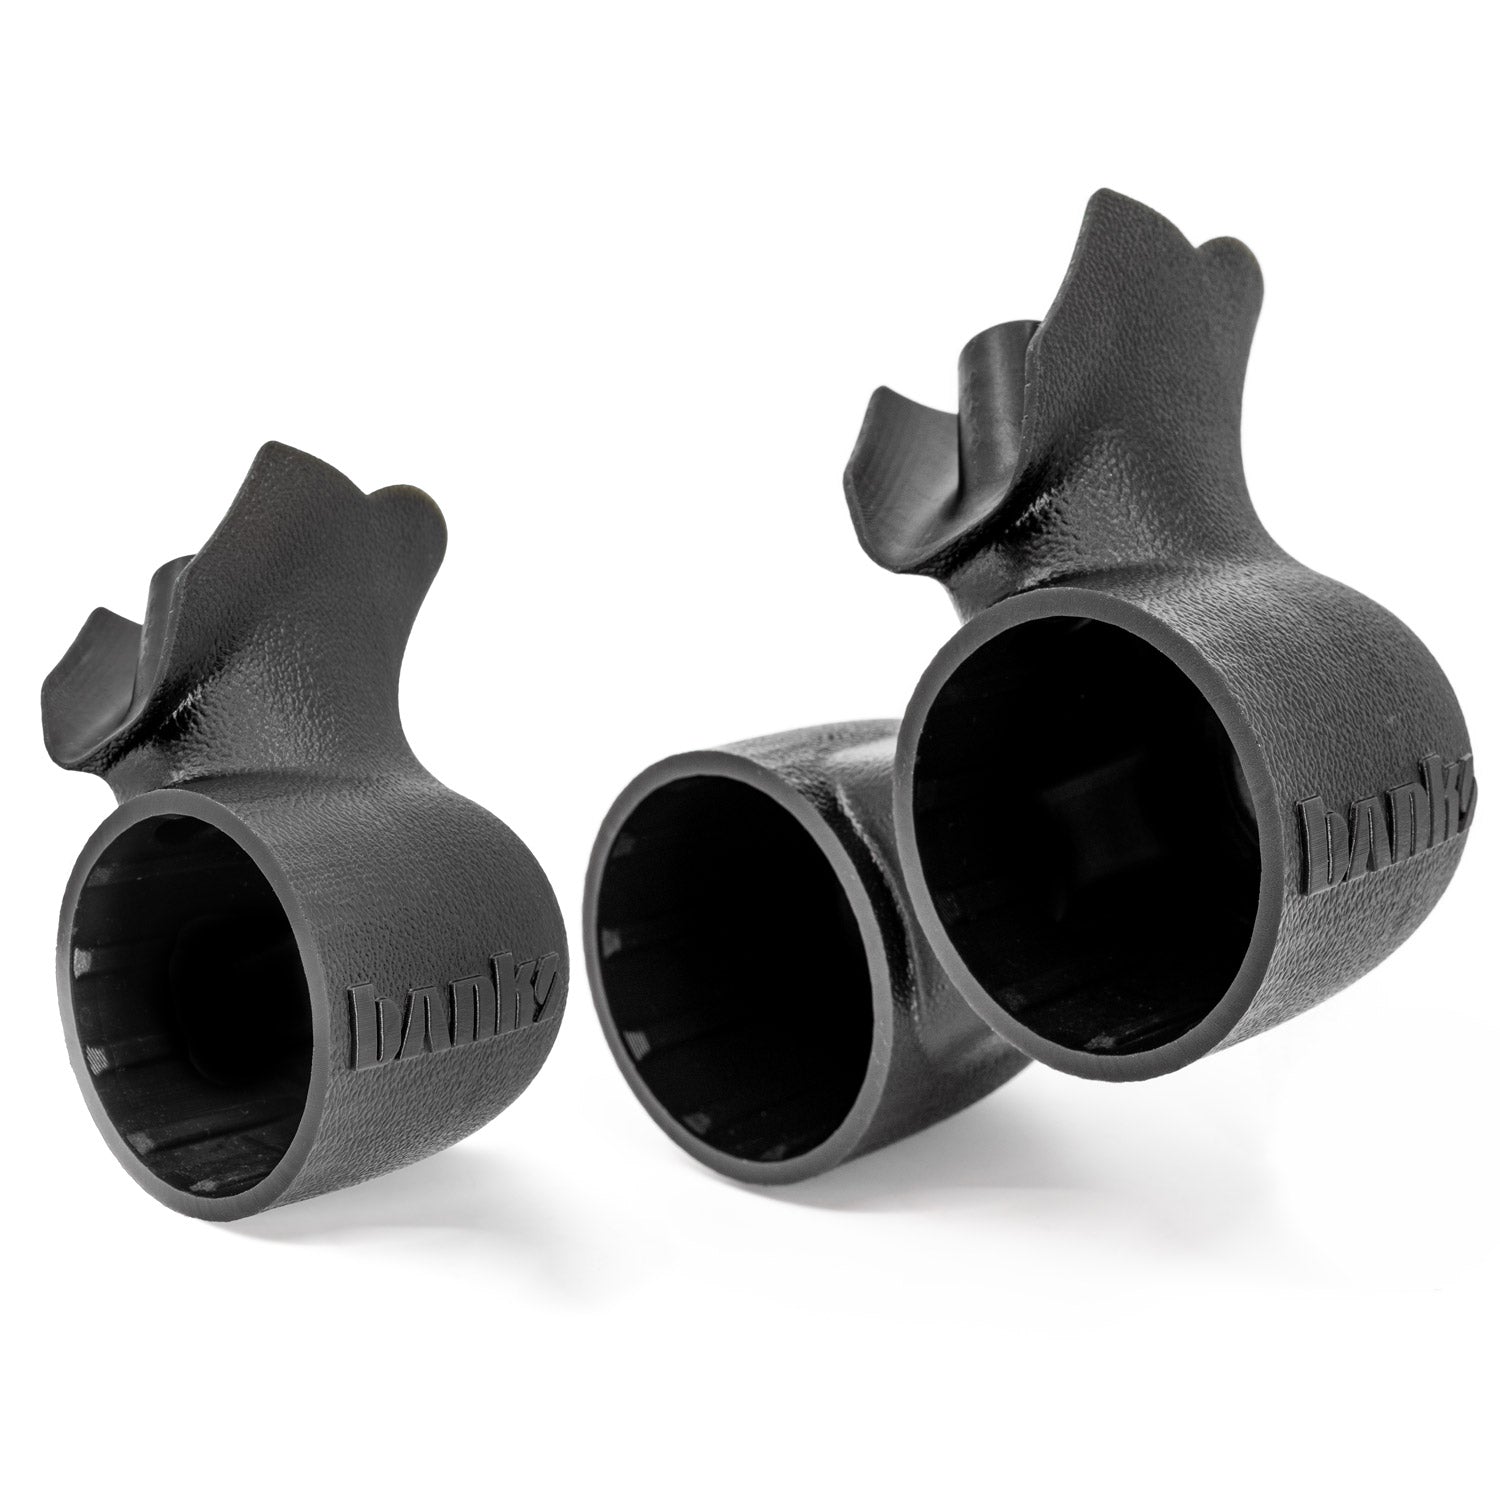 iDash Stealth Pods for 2015-20 F150 and 2017-22 Super Duty